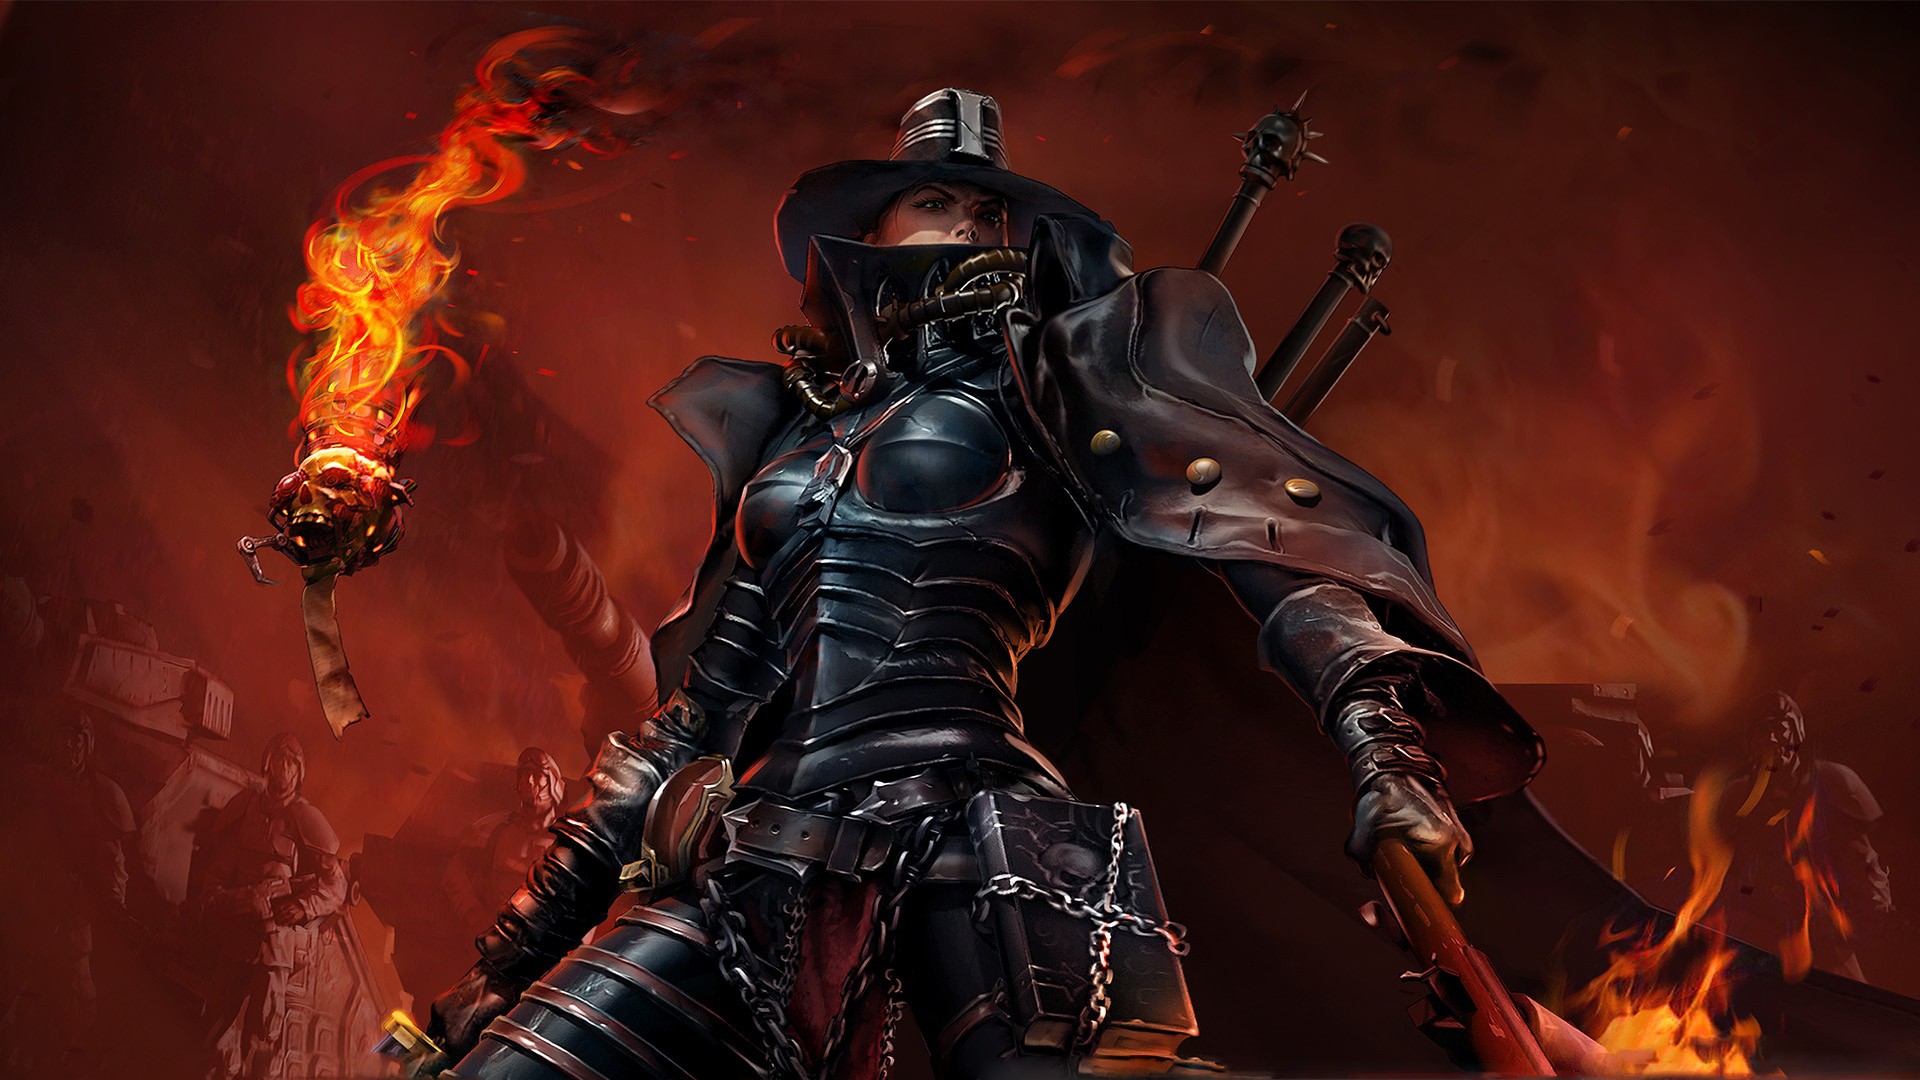 General 1920x1080 video game characters fantasy girl armor Warhammer 40,000 hat women with hats fantasy armor fire